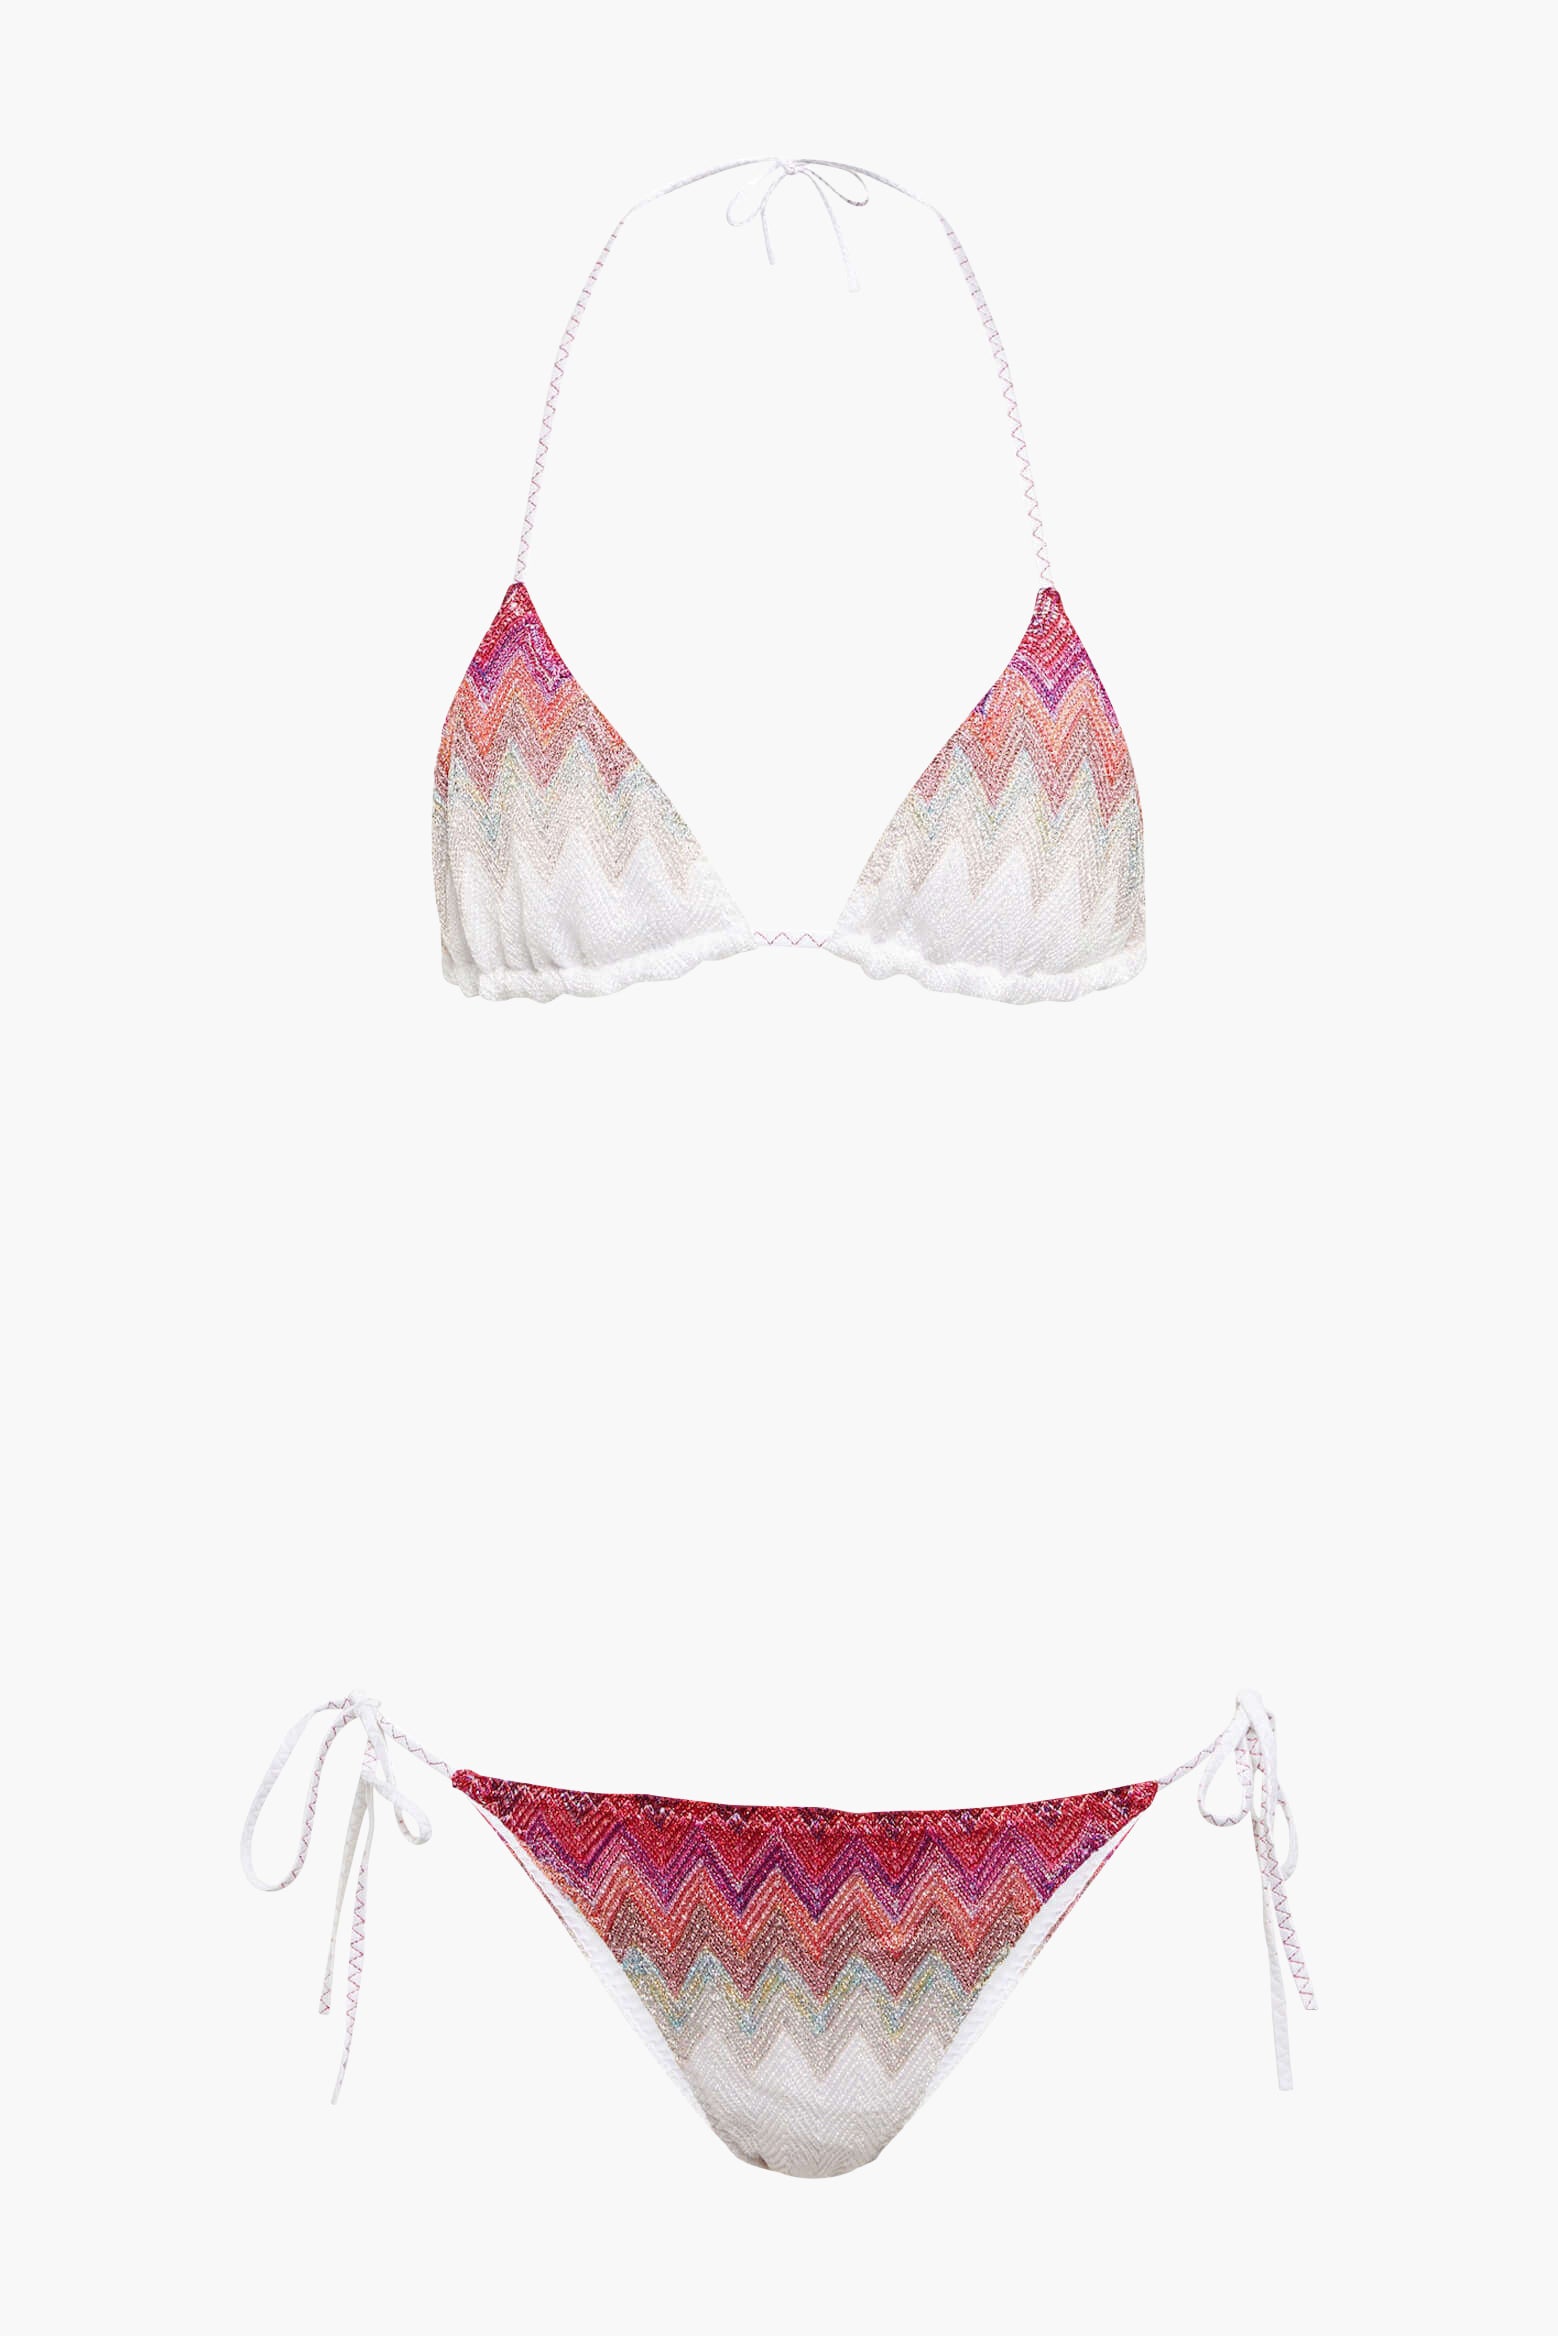 Missoni Mare Zig Zag Tri Bikini in White/Rose/Pink available at TNT The New Trend Australia. Free shipping on orders over $300 AUD.